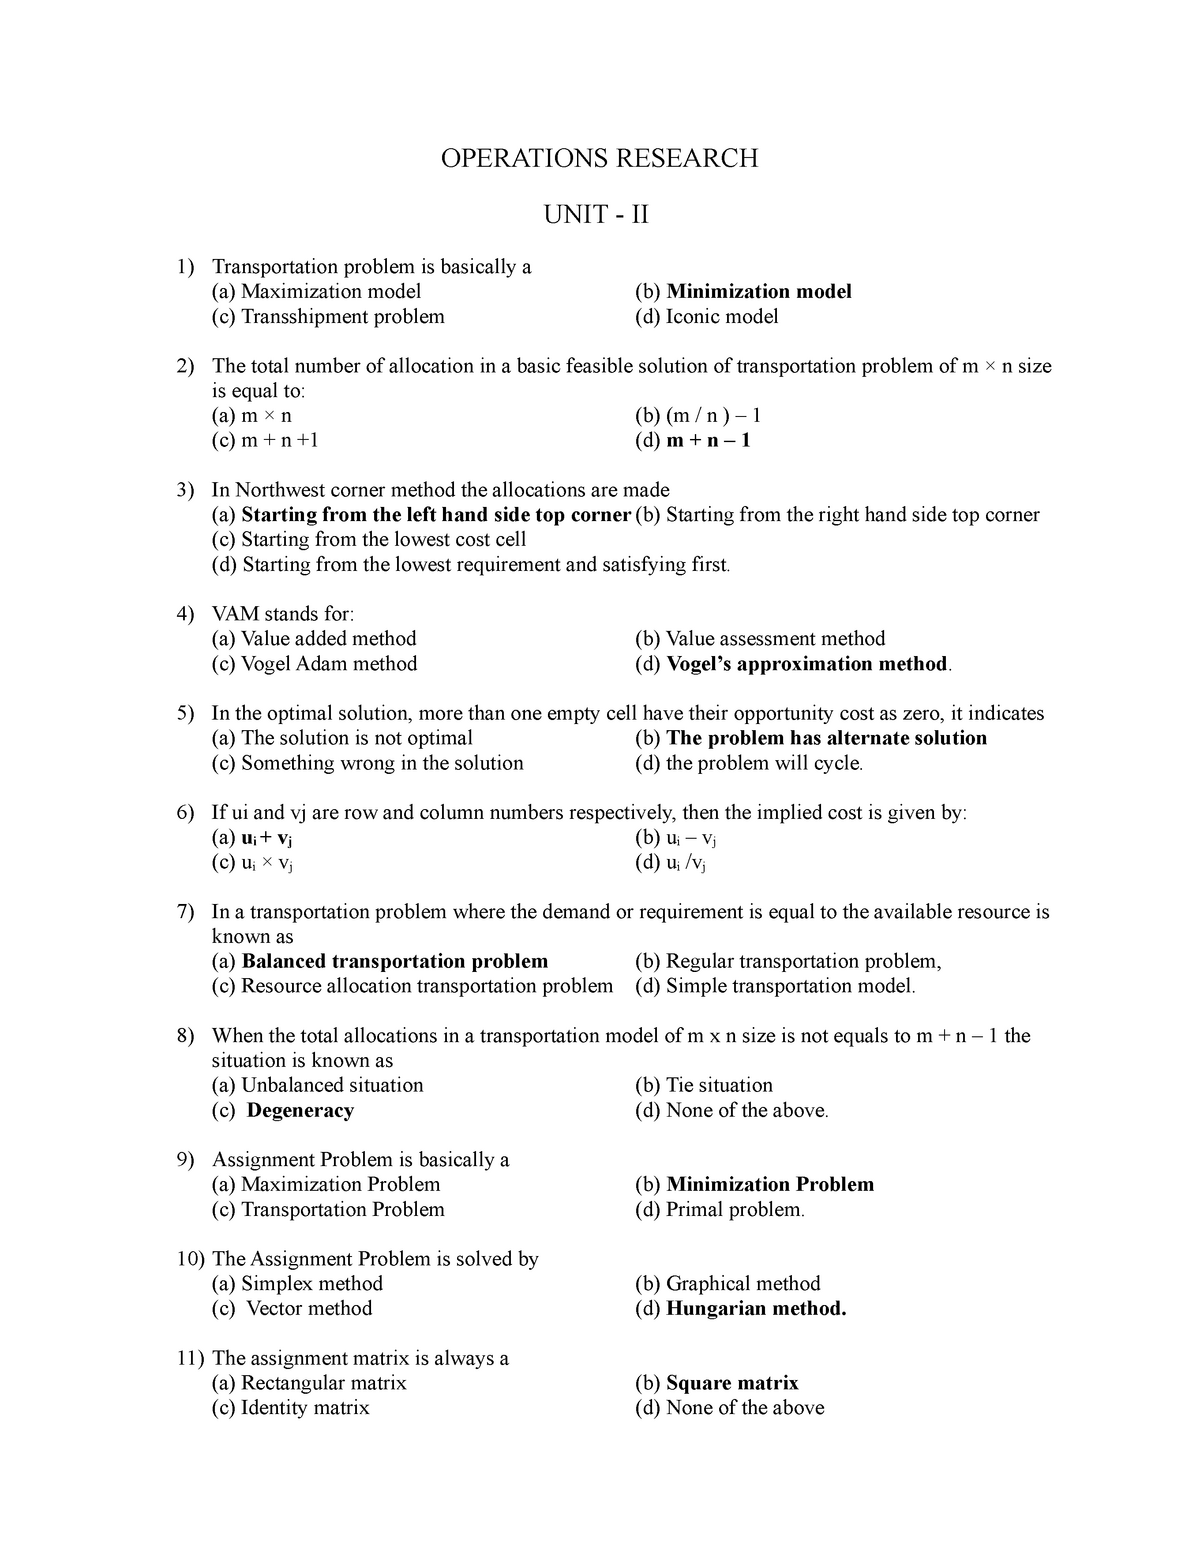 operations research sample questions and answers